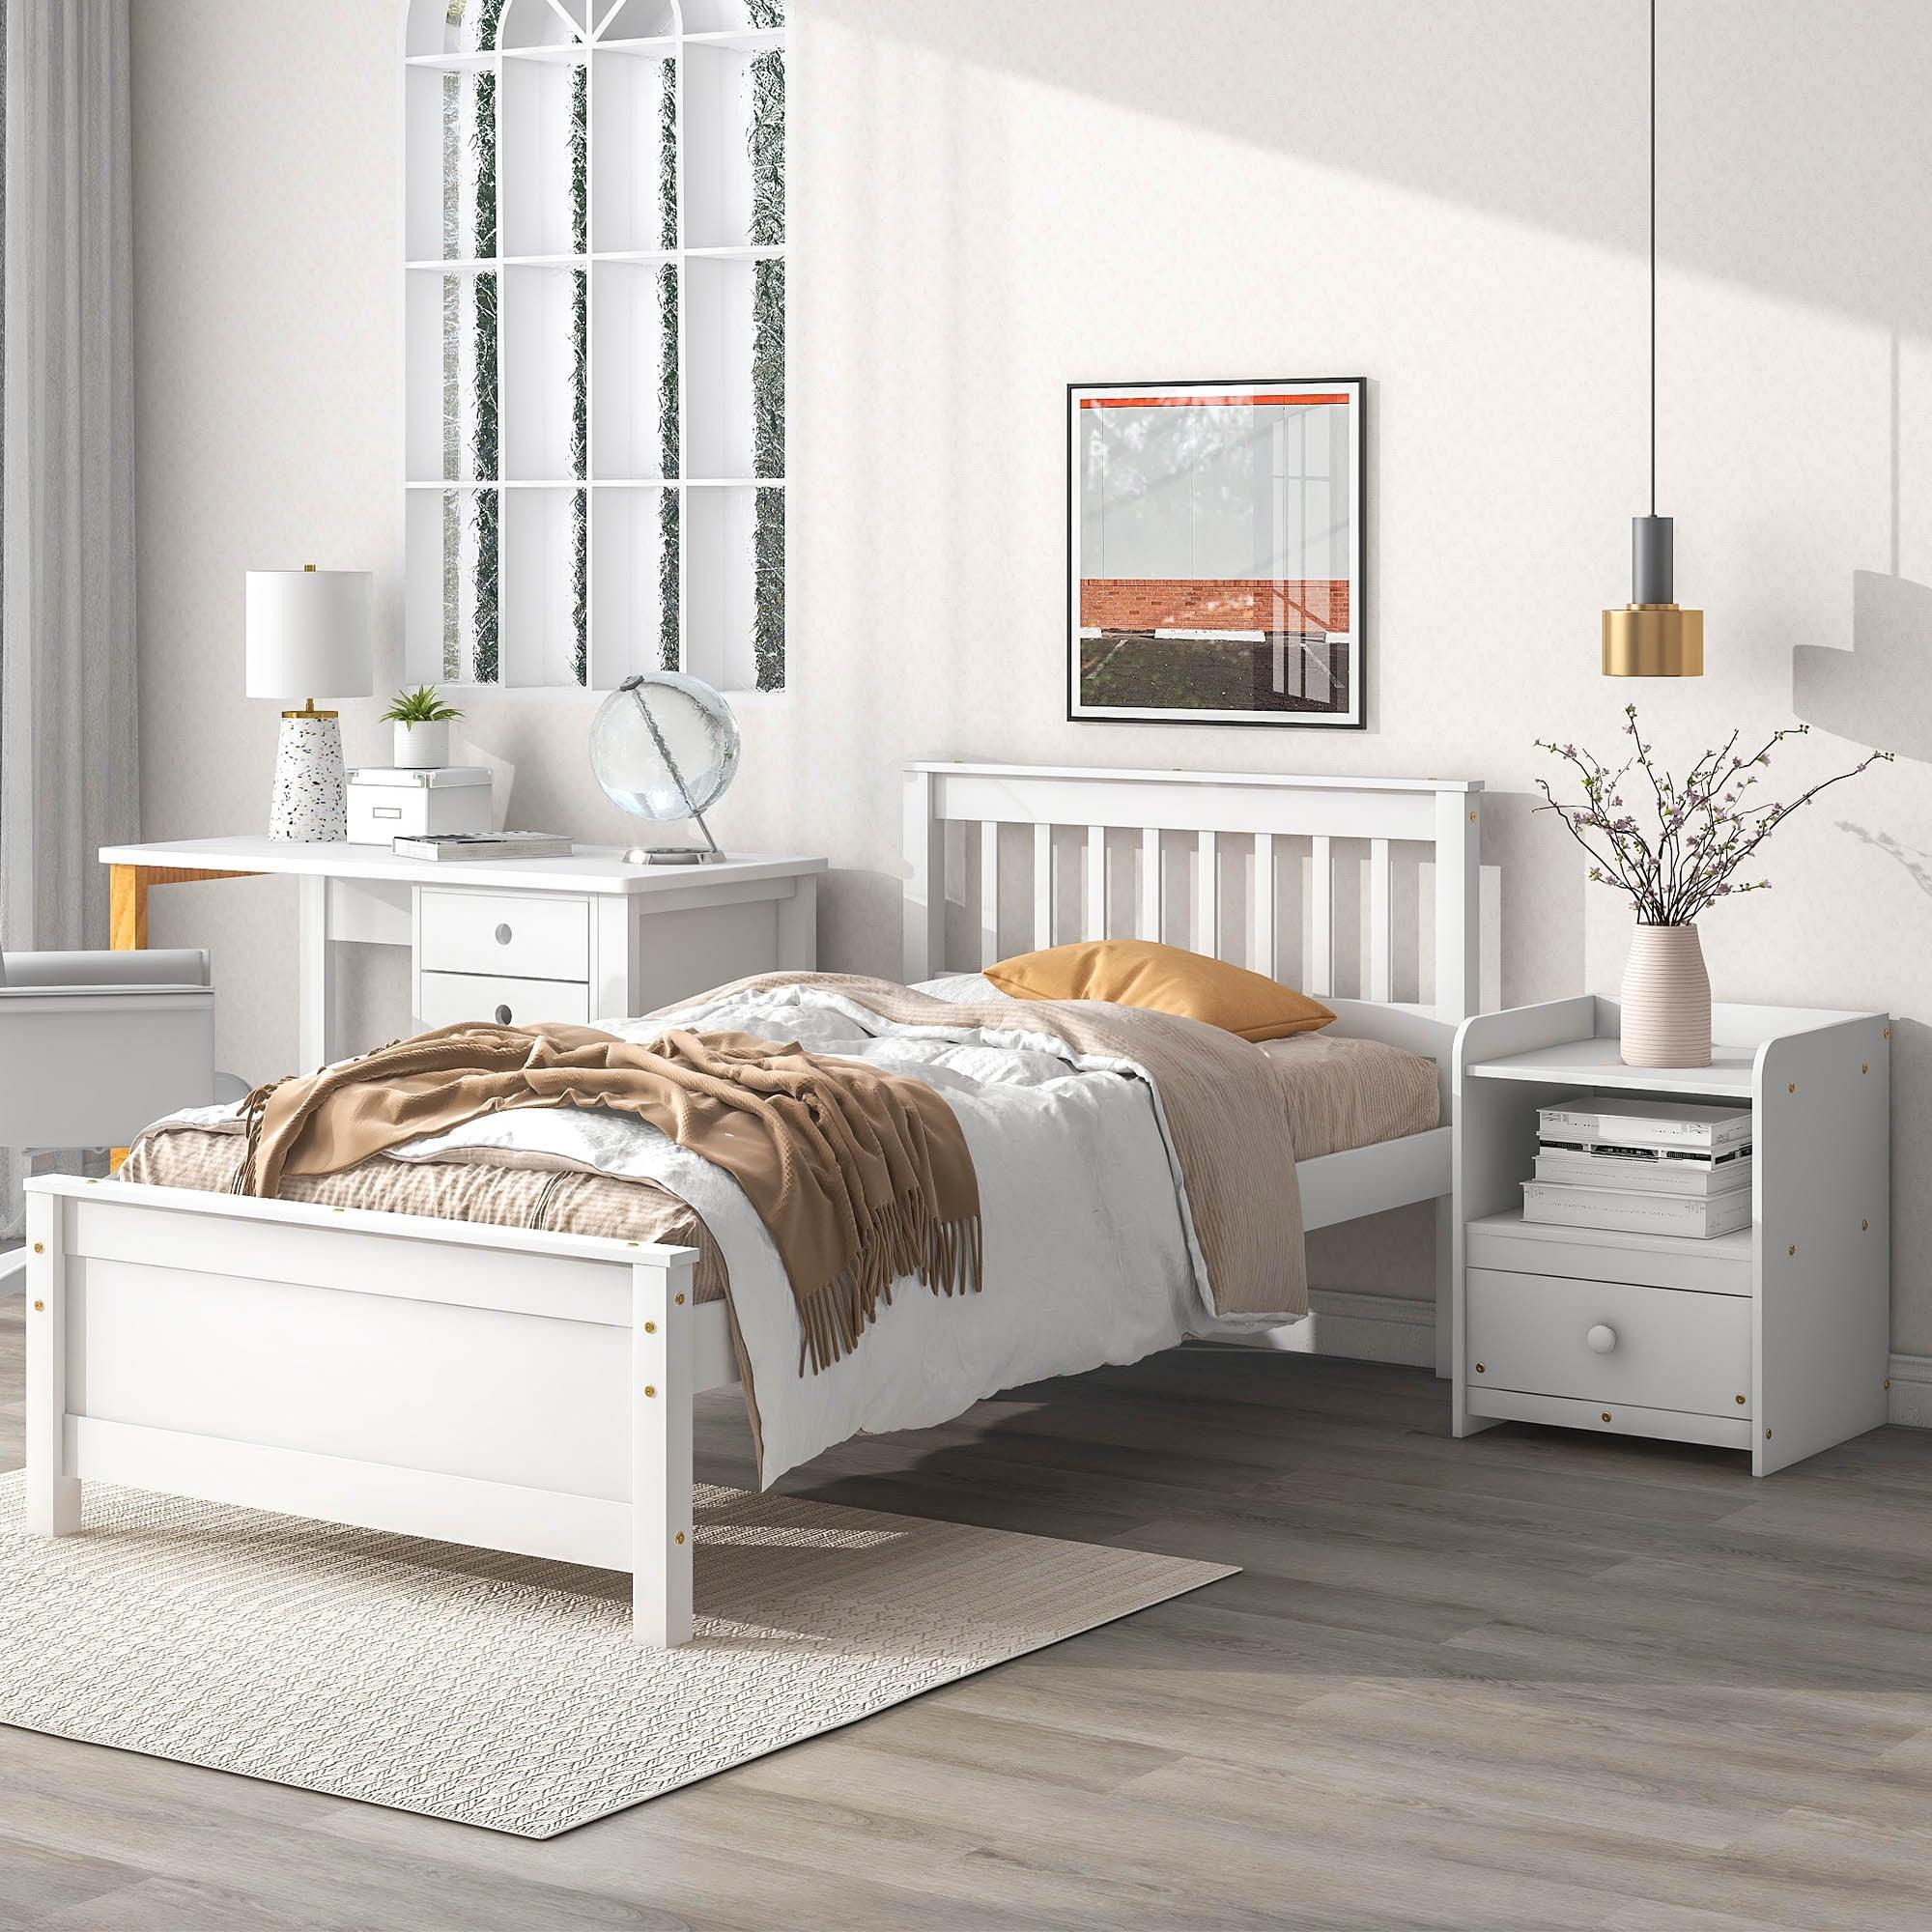 🆓🚛 Twin Bed With Headboard & Footboard for Kids, Teens & Adults With a Nightstand, White